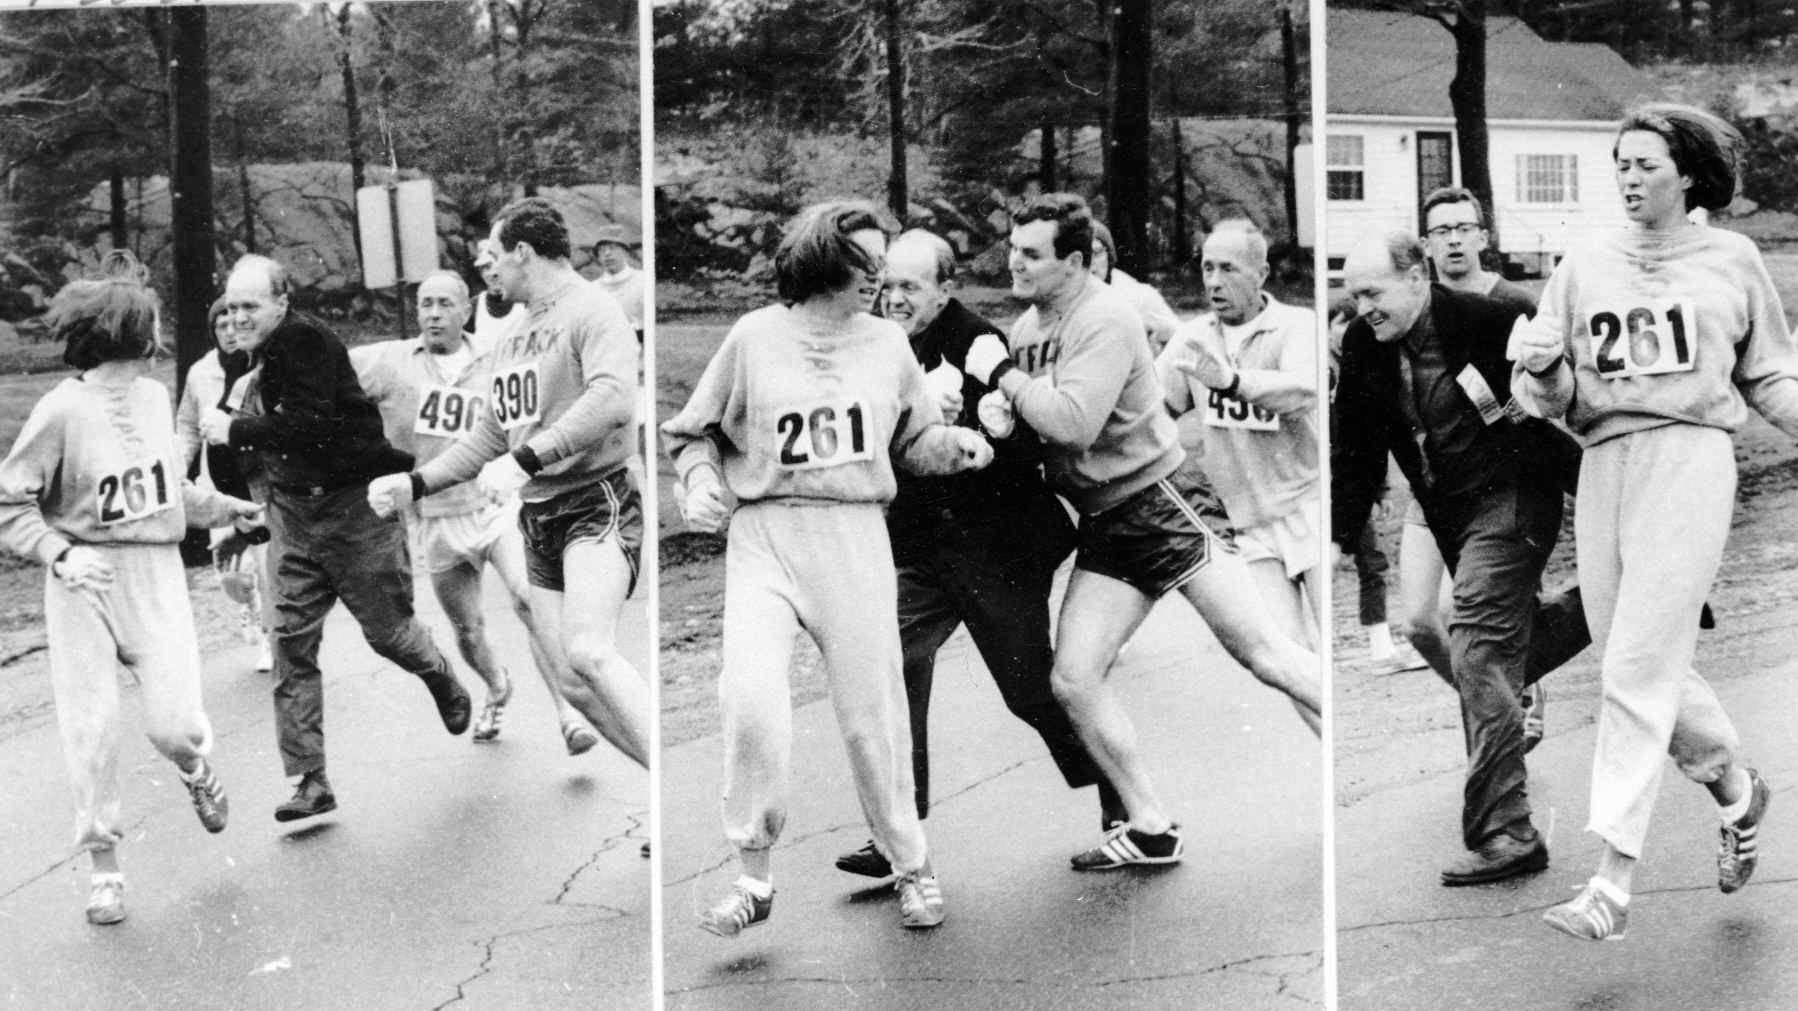 Boston Marathon official Jock Semple tries to eject Kathrine Switzer (261) in 1967, but Tom Miller runs interference and blocks him out.